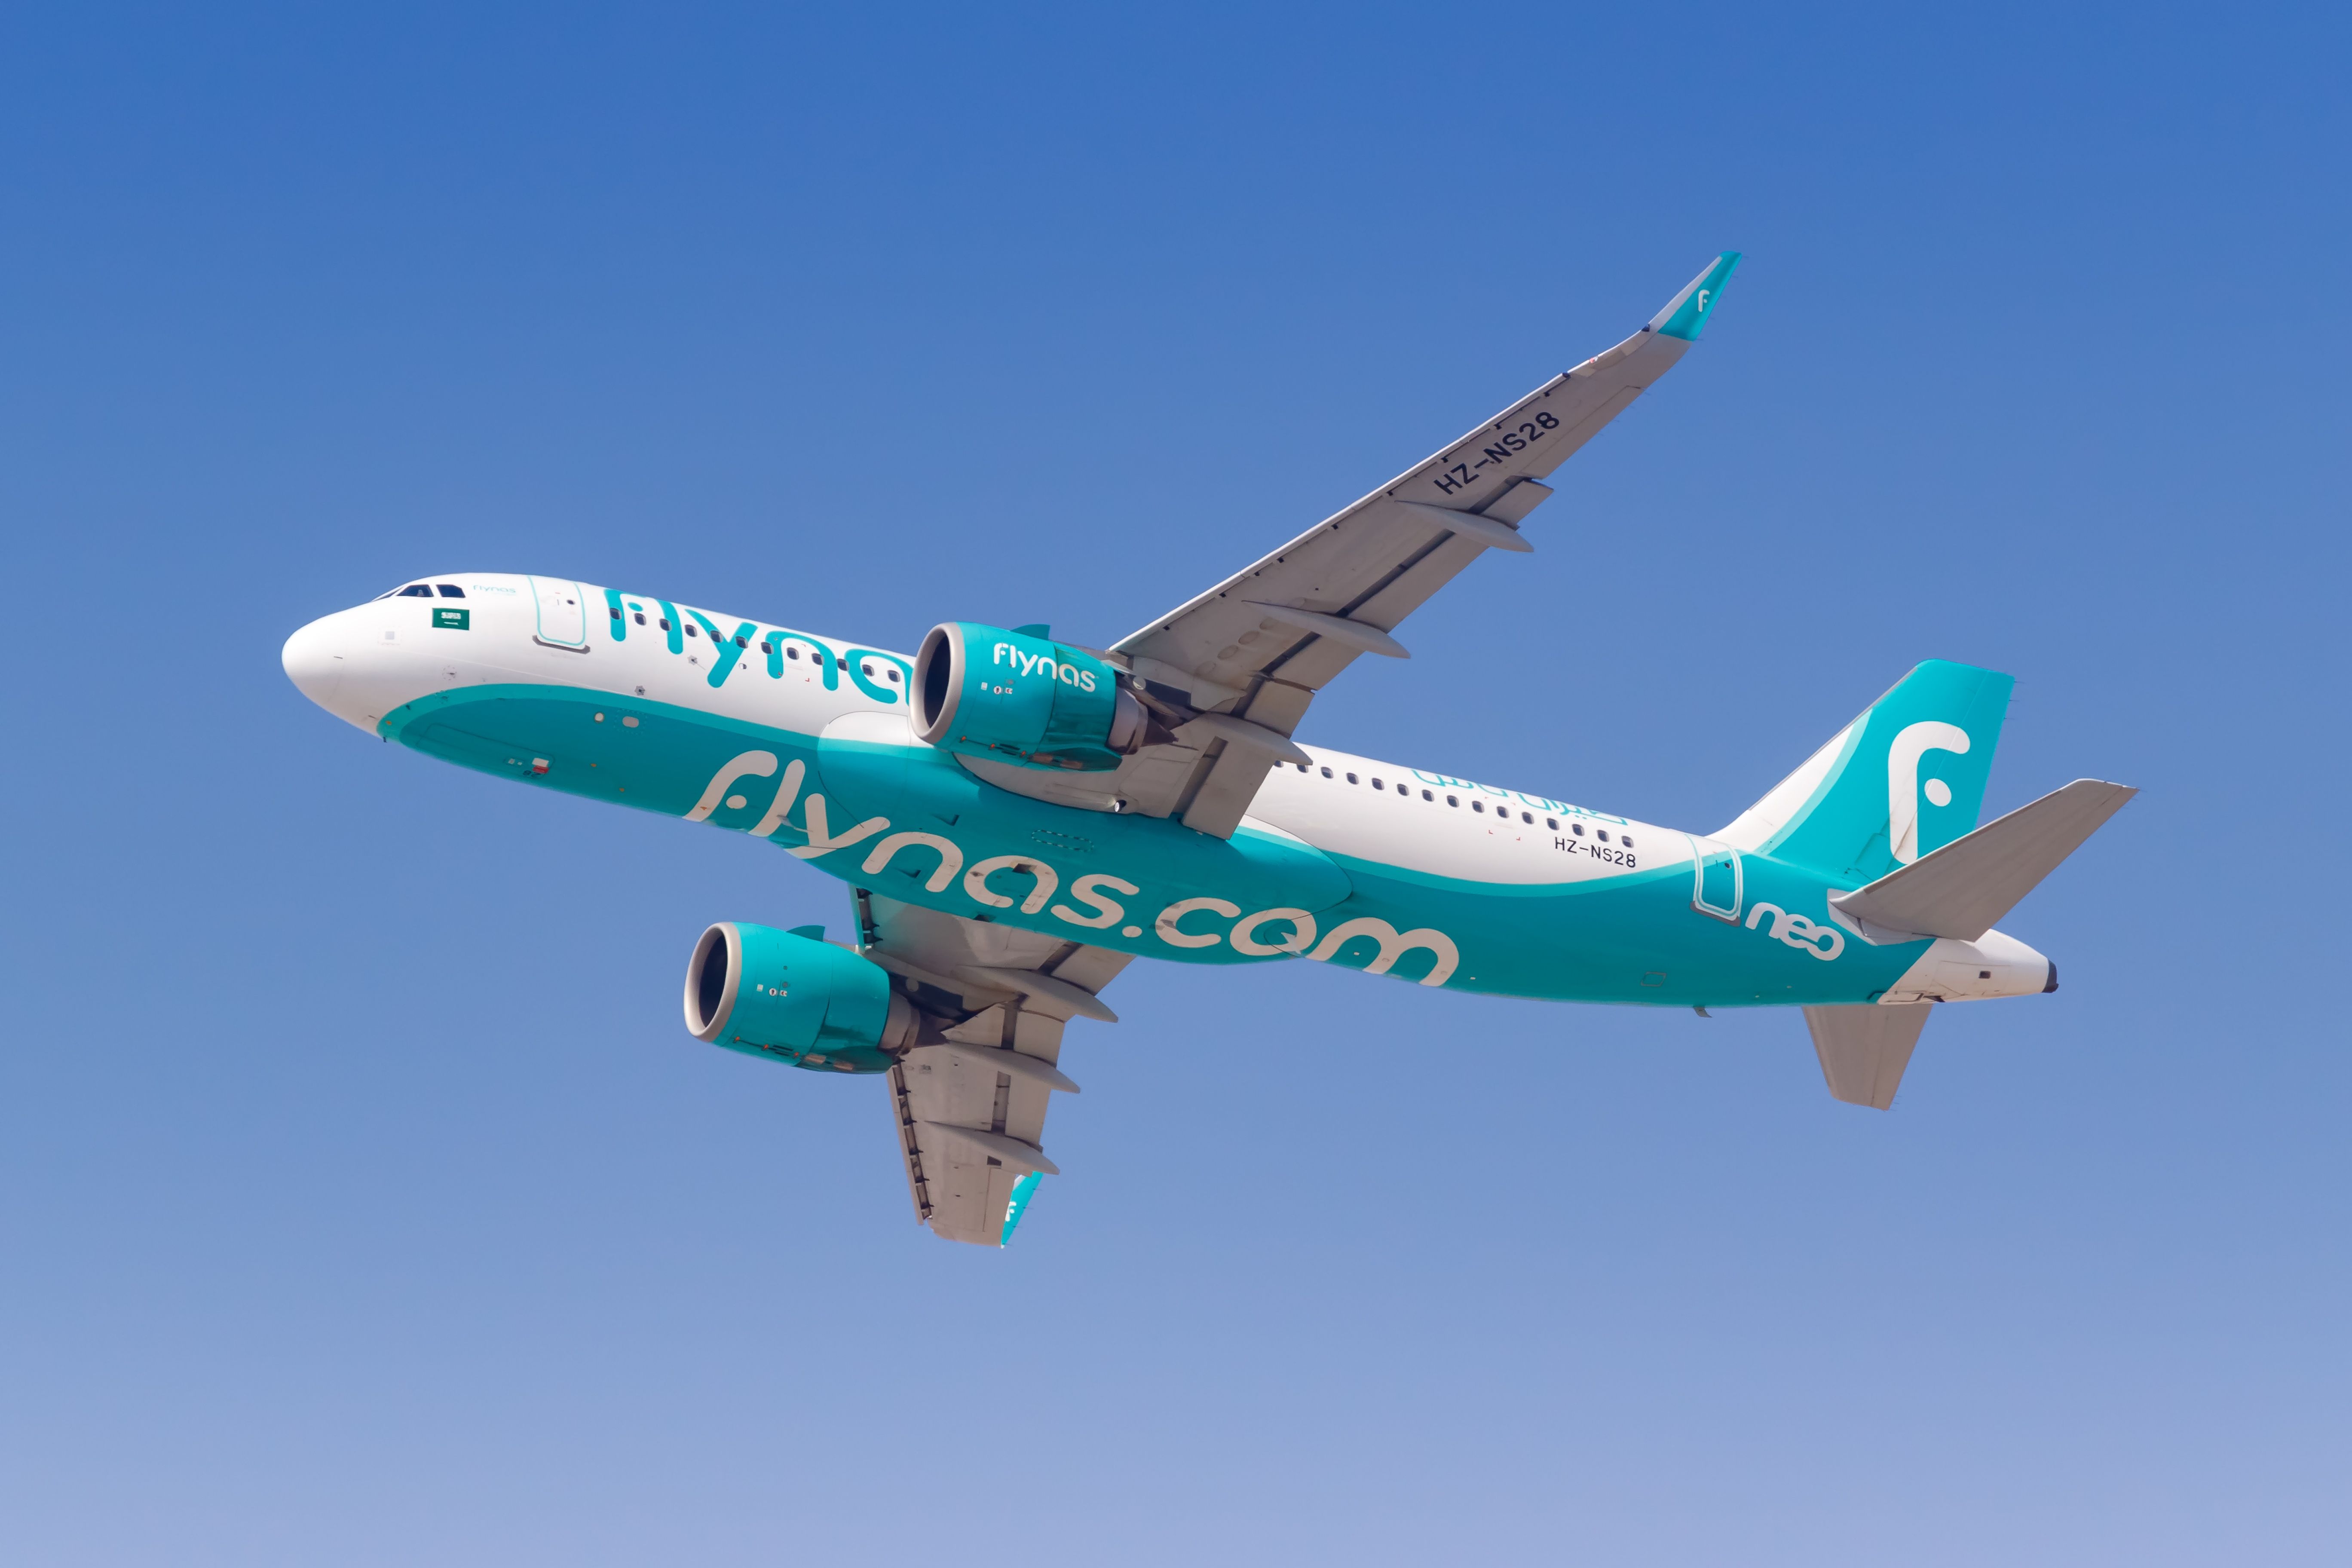 A Flynas Airbus A320neo flying in the sky.